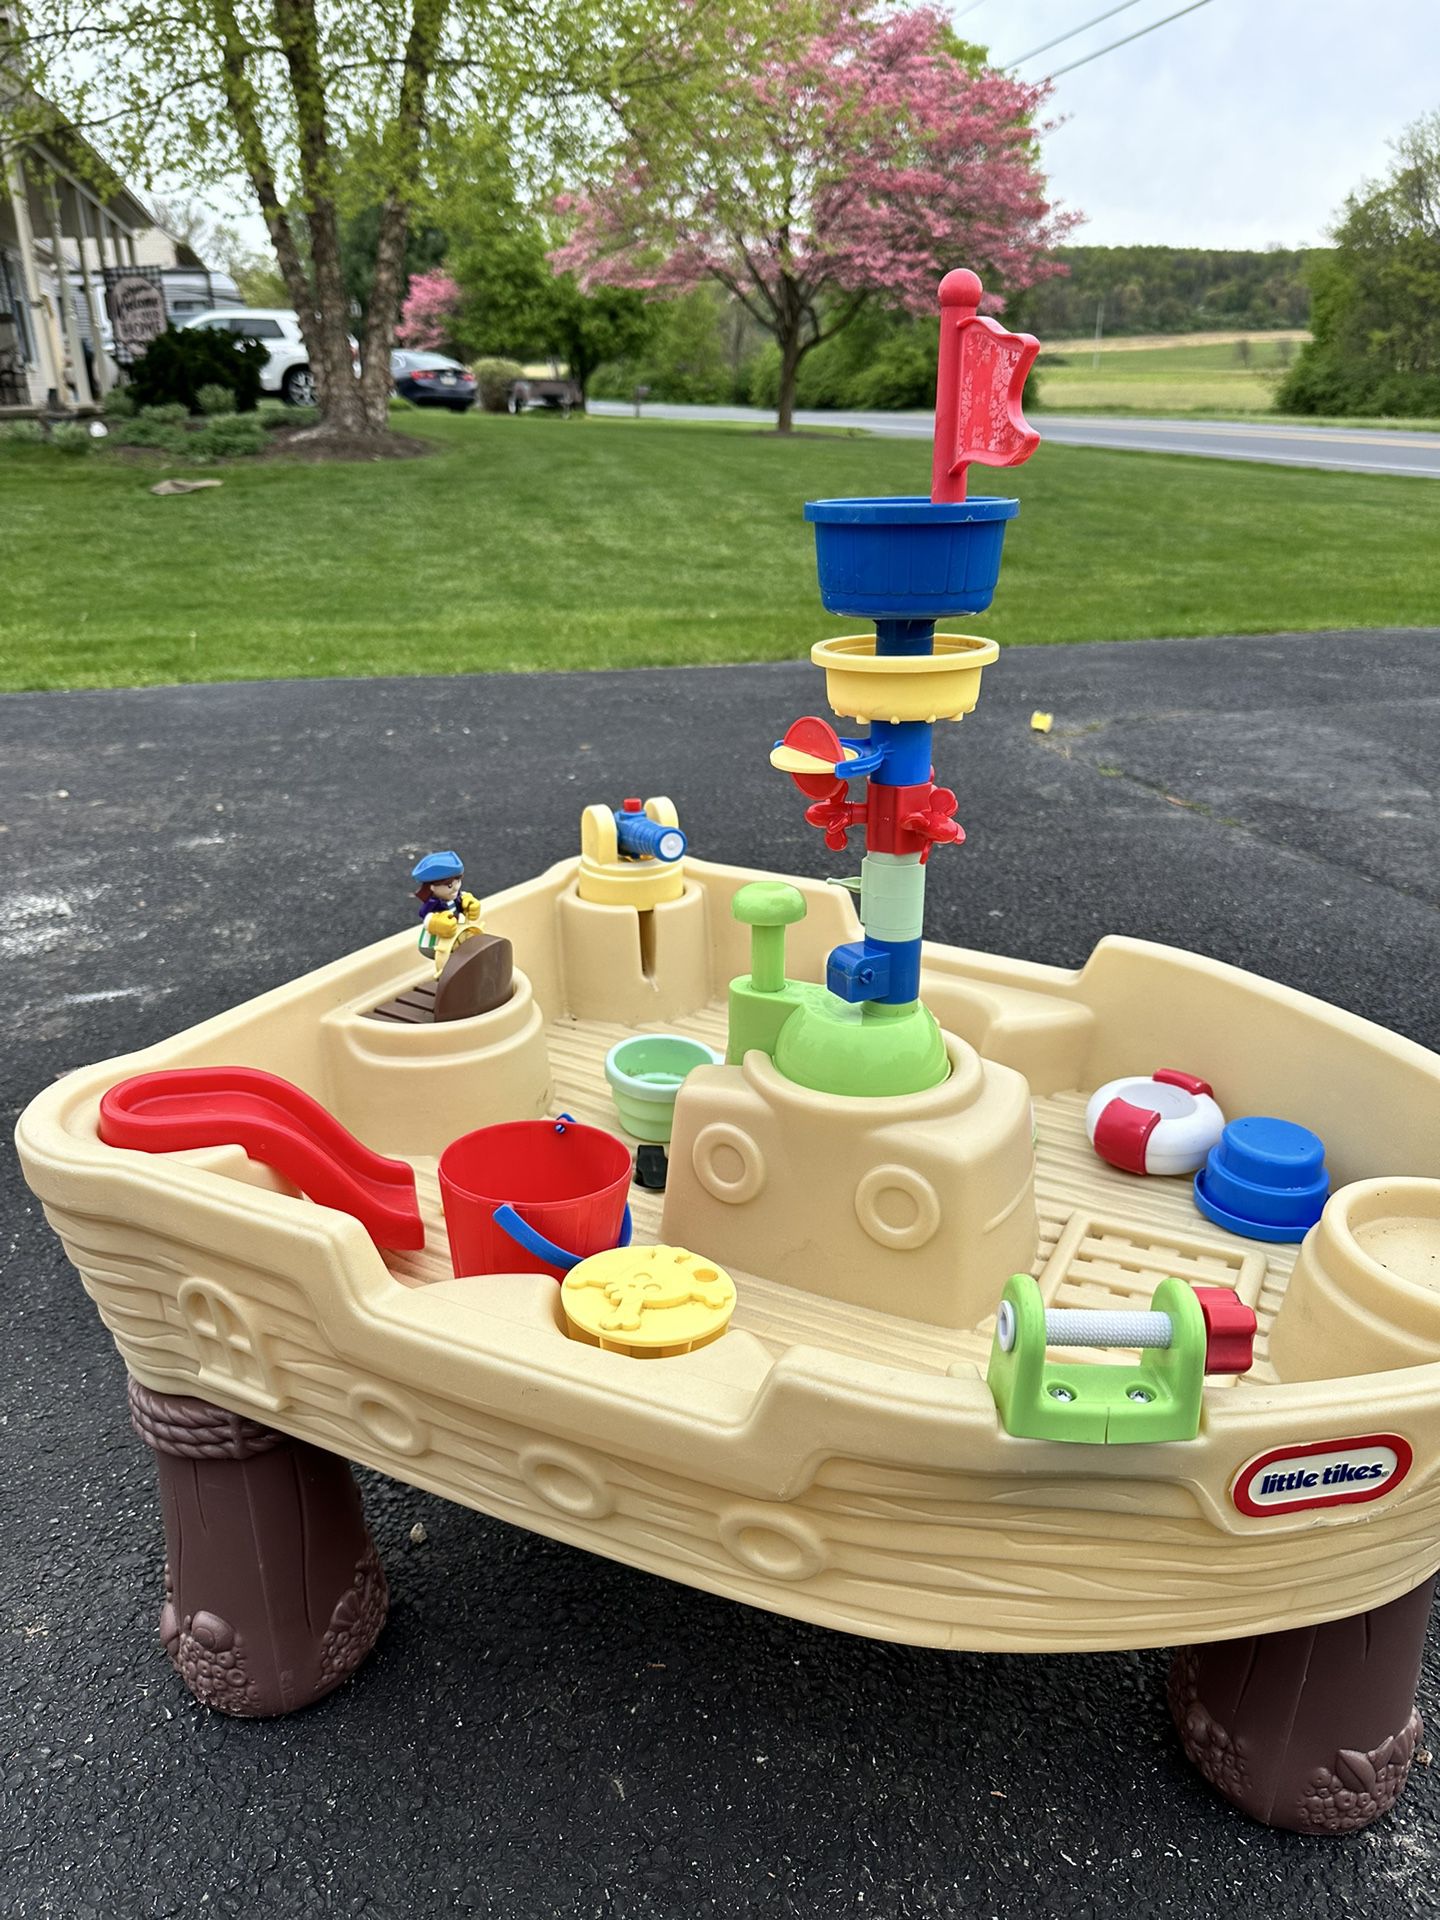 Little Tikes Pirate Water Table